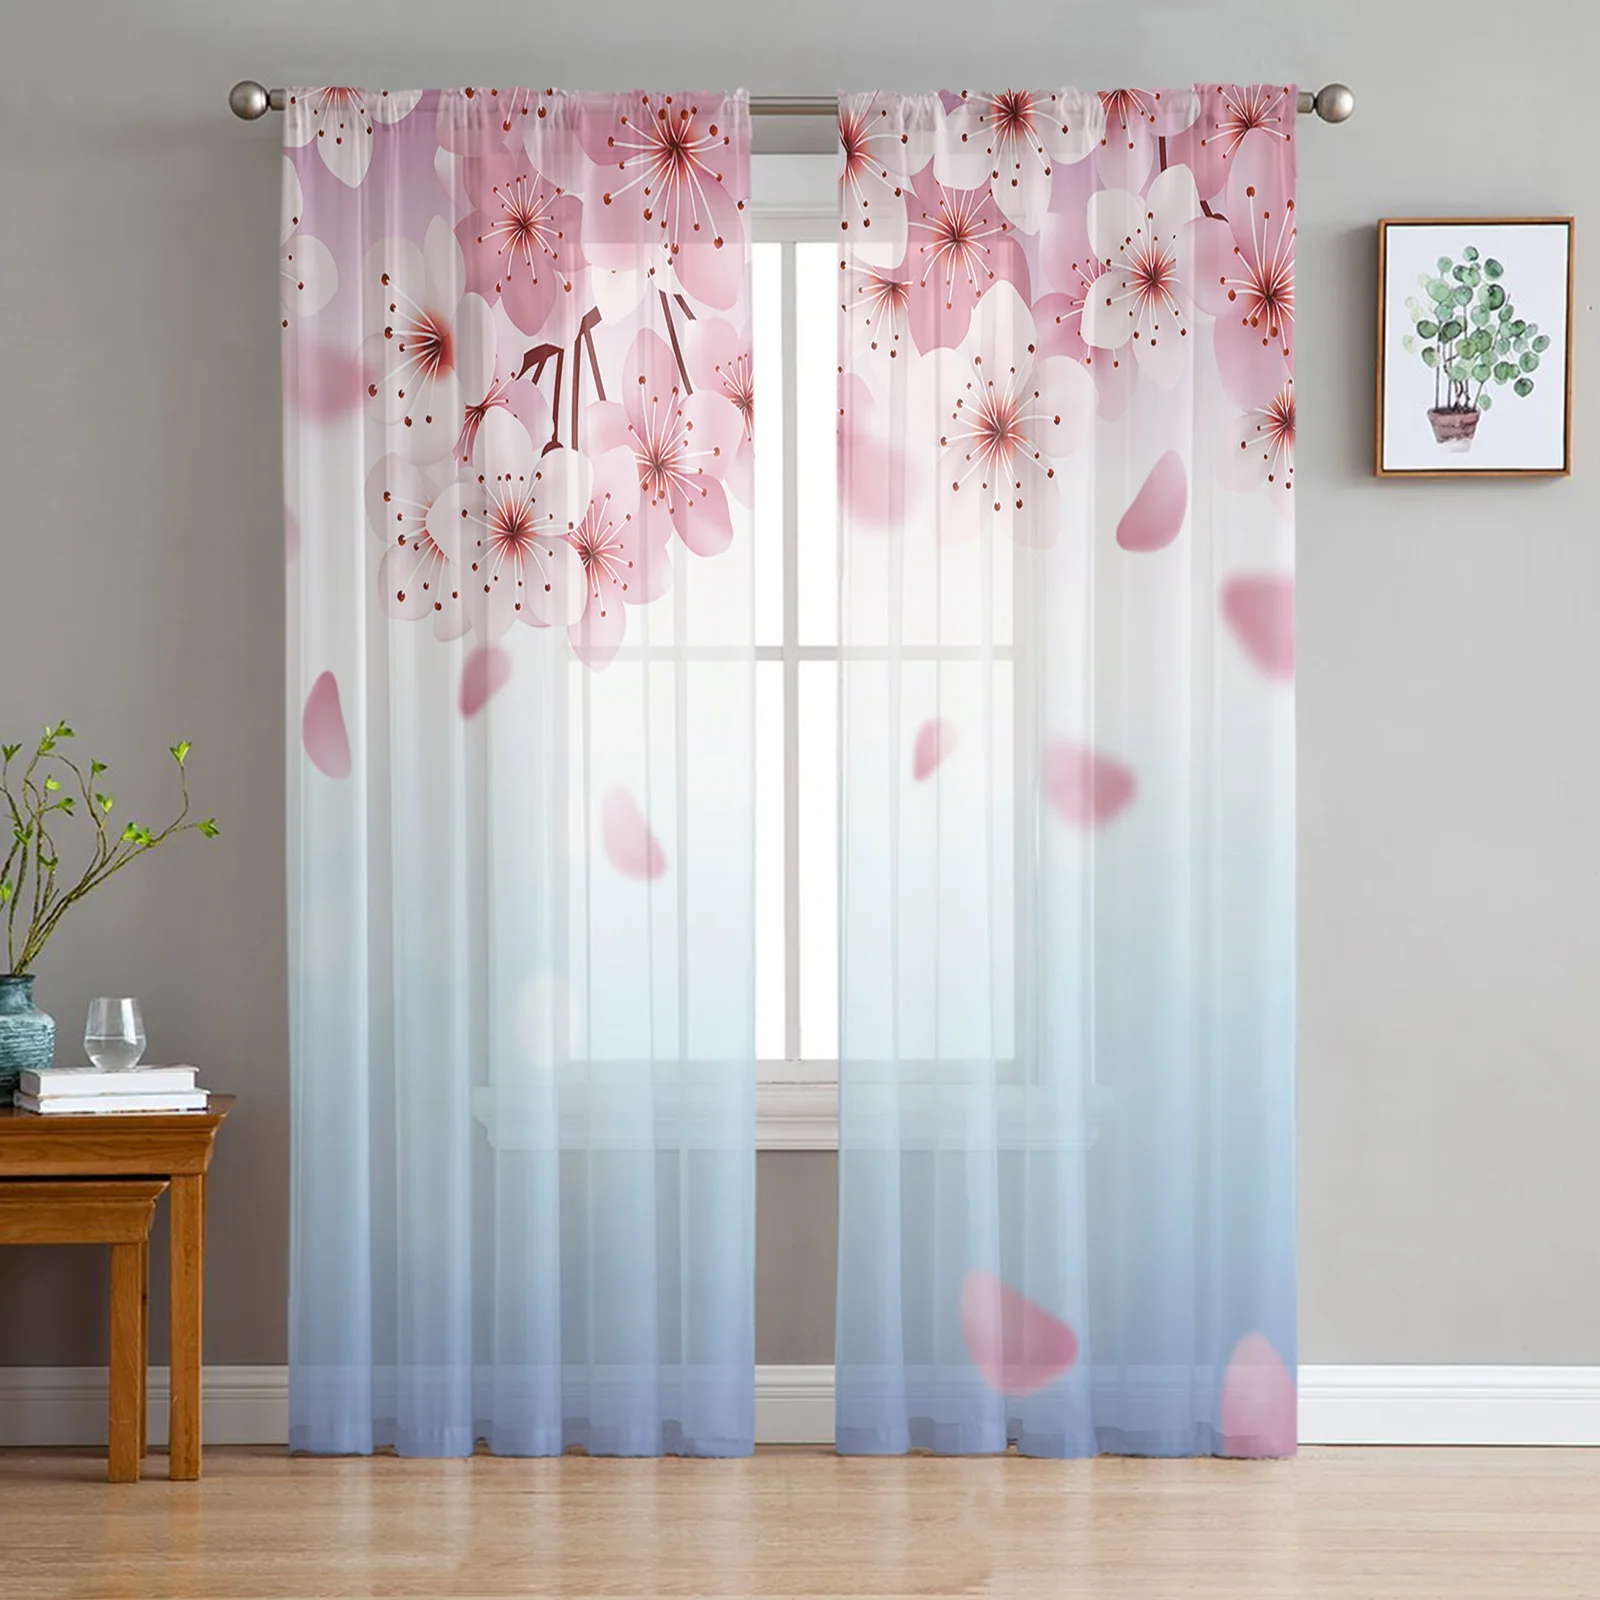 

New Cherry Blossom Flower Butterfly Pink Tulle Curtains For Living Room Bedroom Voile Curtain Sheer Balcony Door Curtain